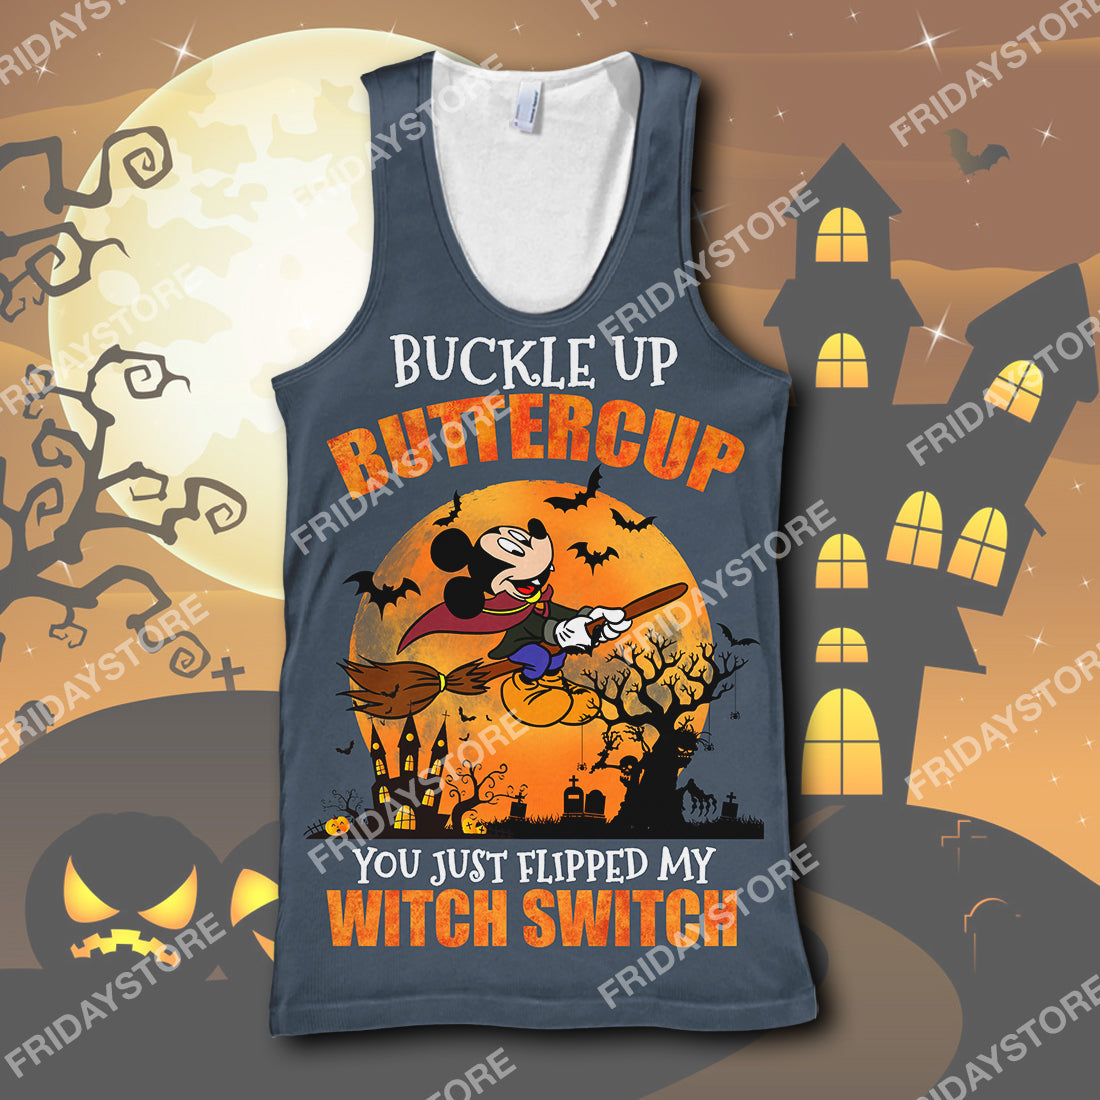 Unifinz DN T-shirt Buckle Up Buttercup You Just Flipped My Witch Switch T-shirt High Quality DN MK Mouse Hoodie Sweater Tank 2025